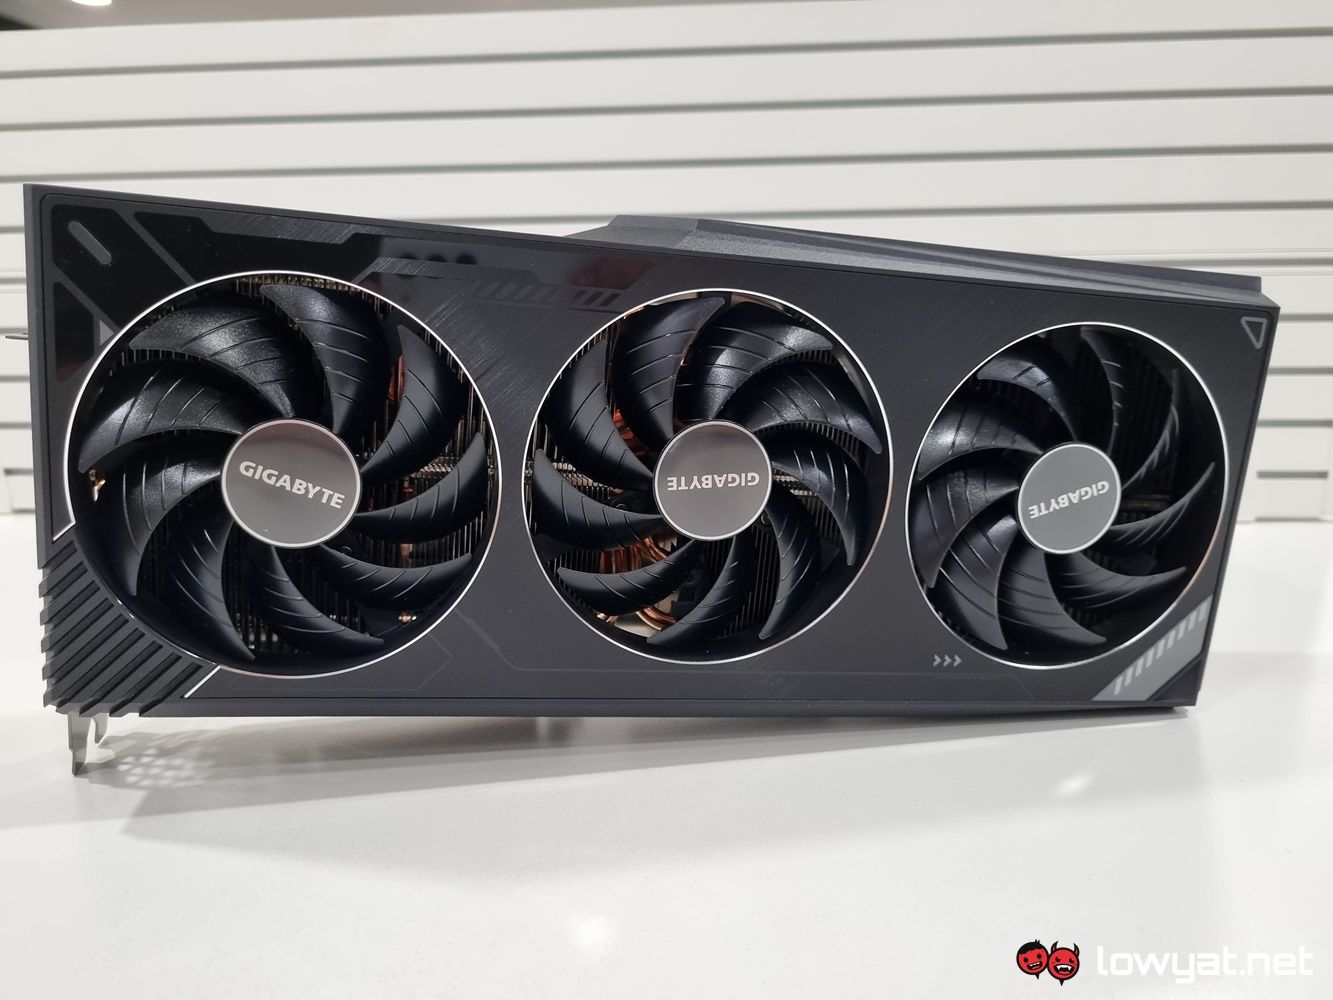 Gigabyte Gaming GeForce RTX 3090 Ti Review: Power Overwhelming 